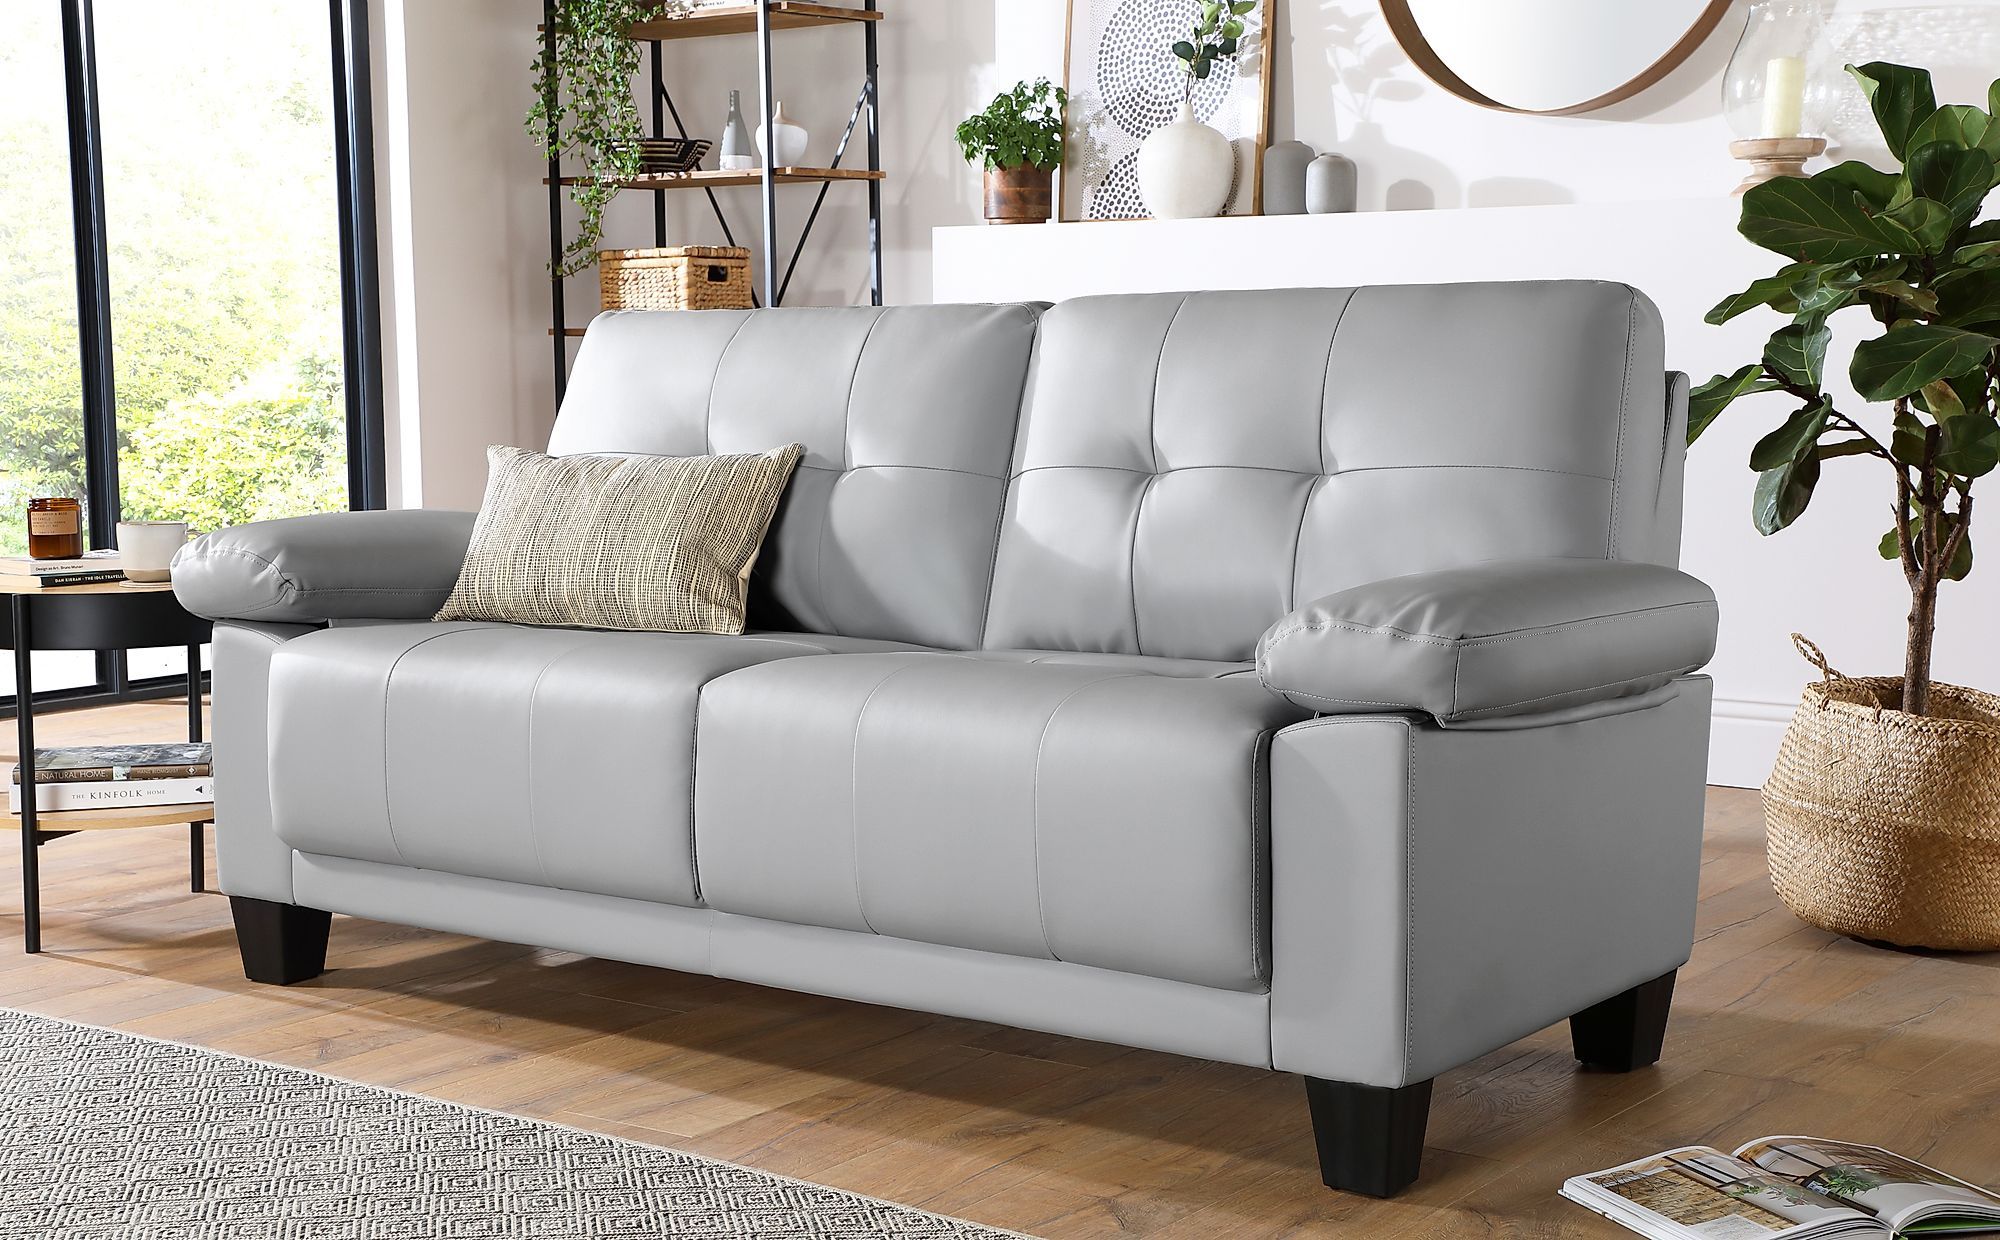 Linton Small Light Grey Leather 3 Seater Sofa | Furniture Choice Inside Sofas In Light Gray (Gallery 16 of 22)